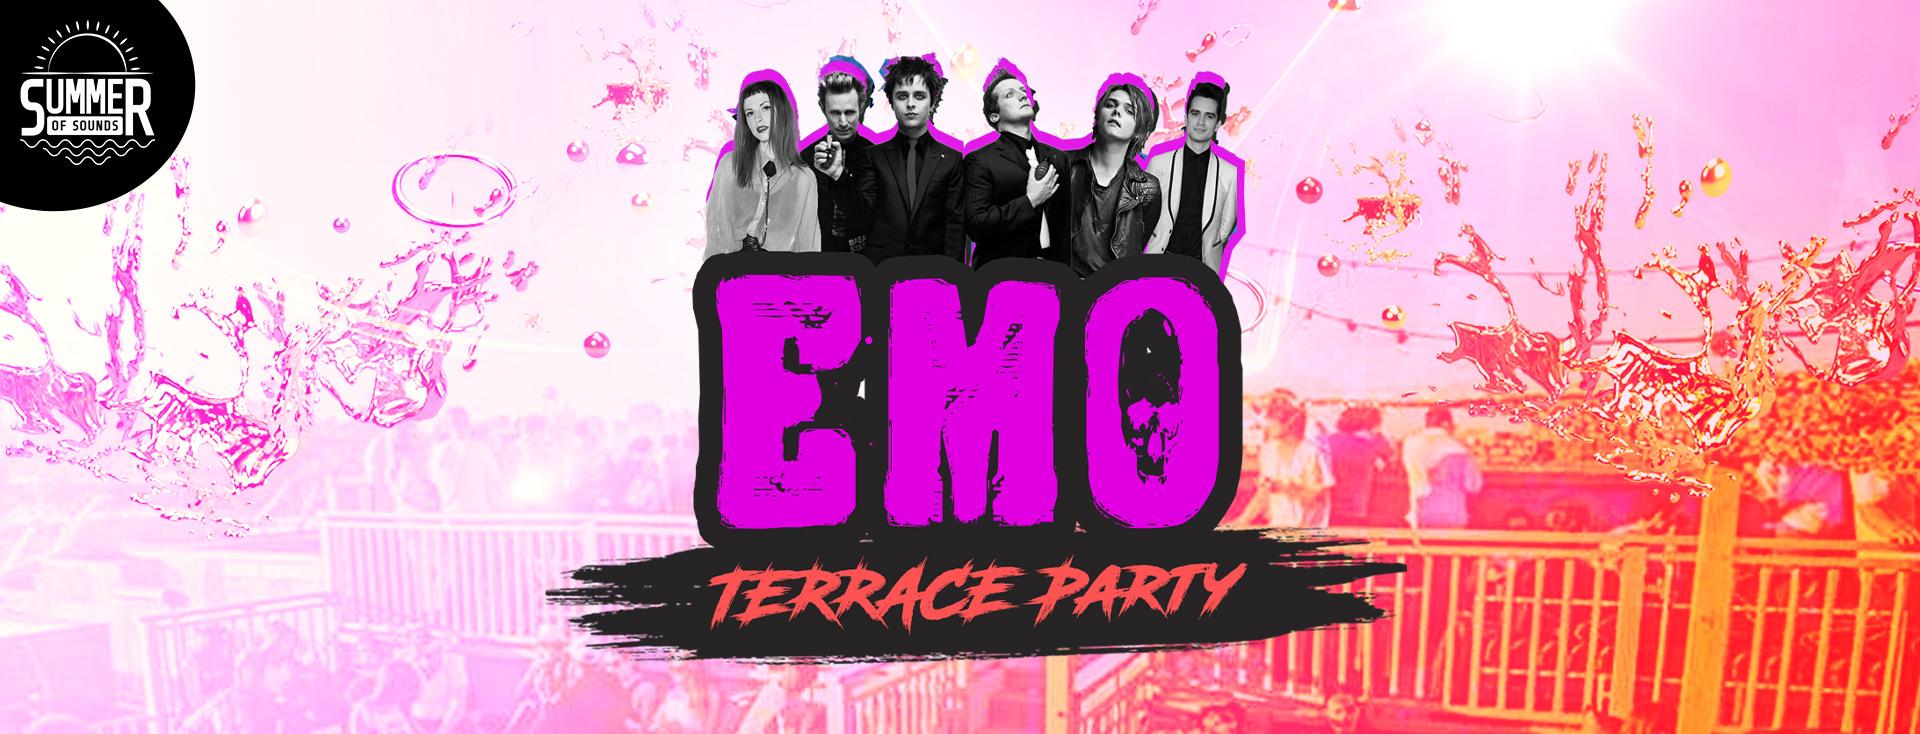 Emo Summer Terrace Party - Cardiff